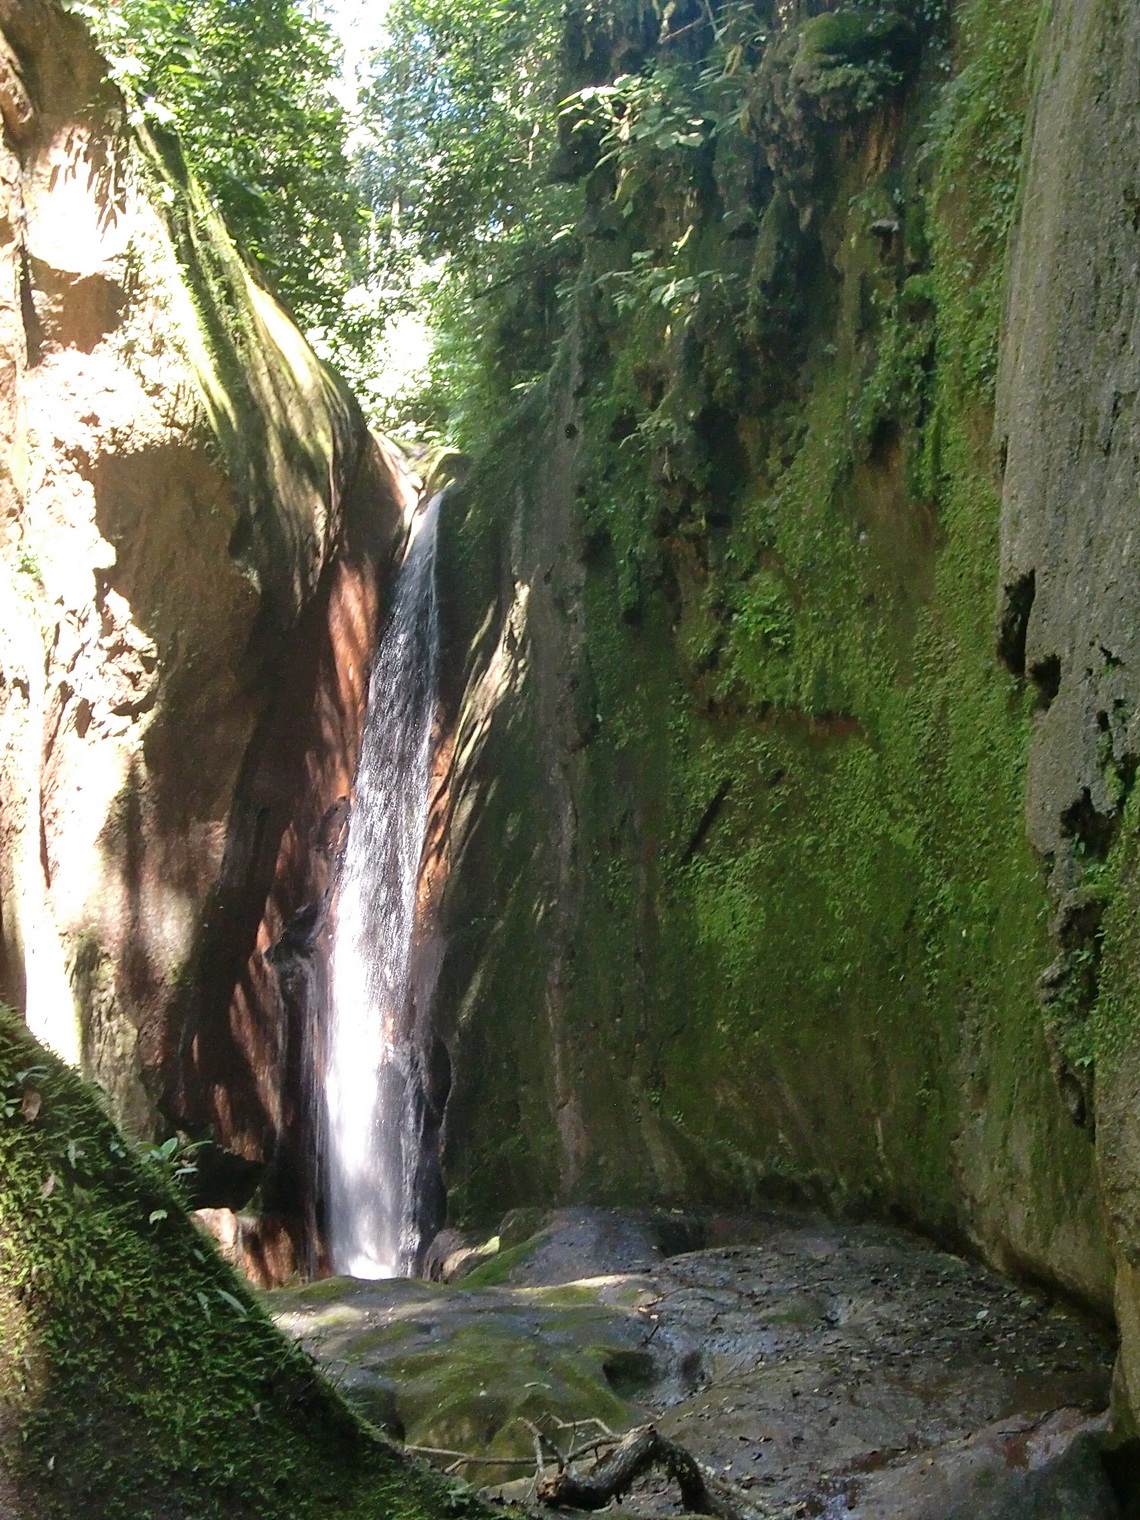 The waterfall in the rocky gorge